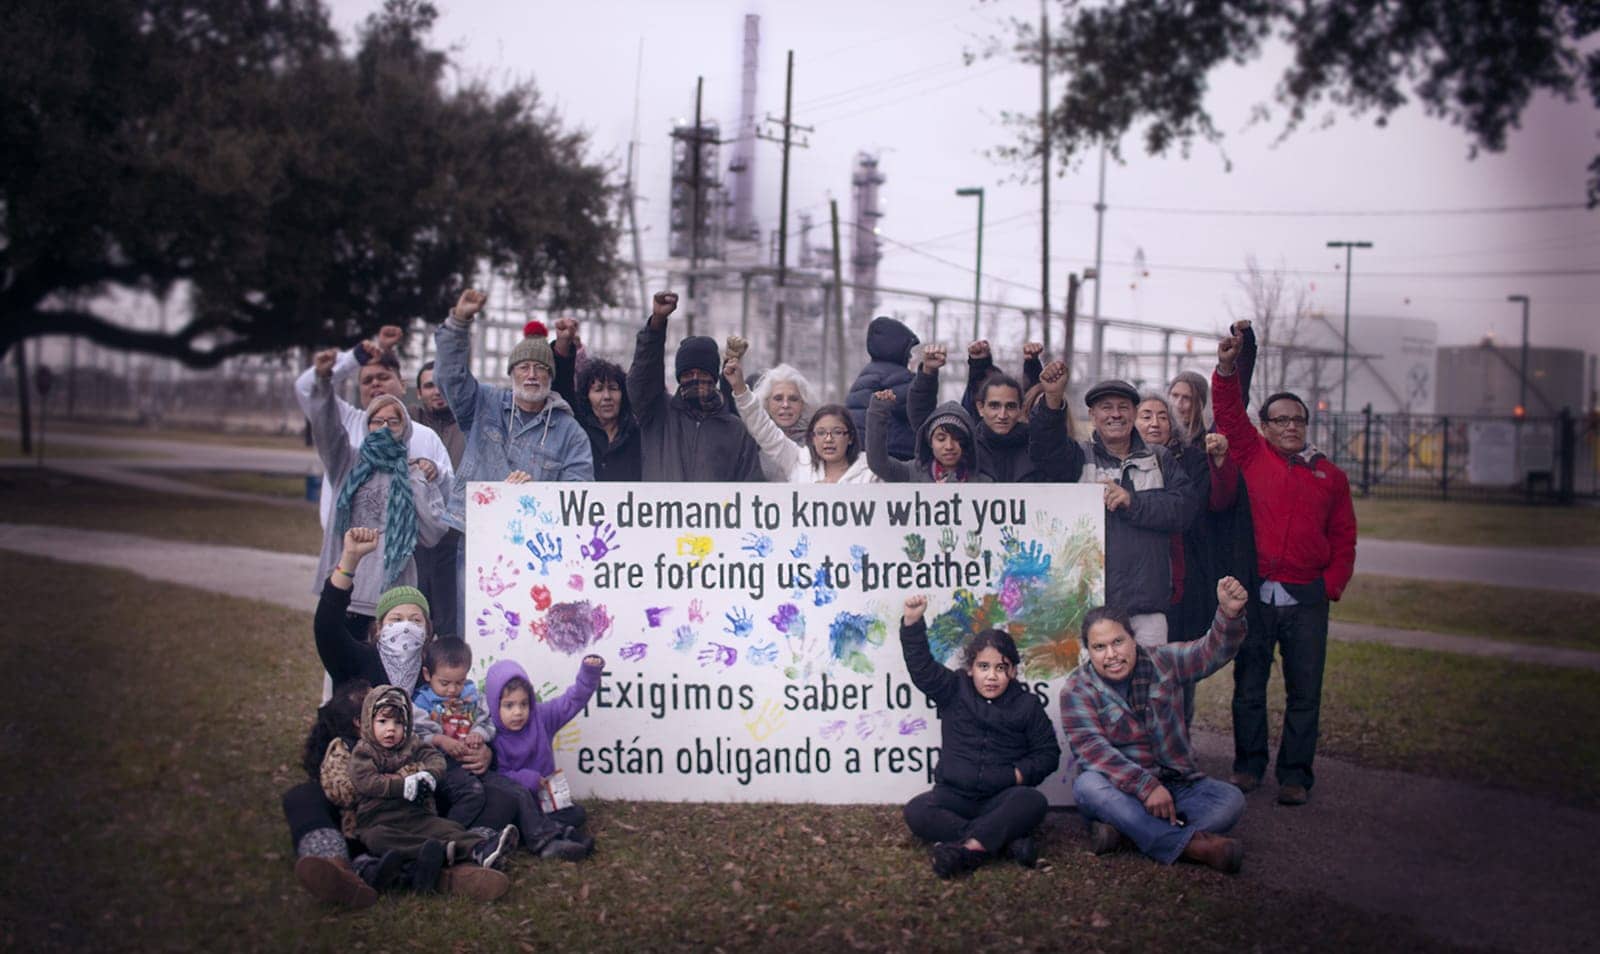 Manchester-comy-Houston-surrounded-by-refineries-We-demand-to-know-what-you-are-forcing-us-to-breathe-web, Toxic threats to people of color: Environmental justice leaders meet in Denver Feb. 11-12, News & Views 